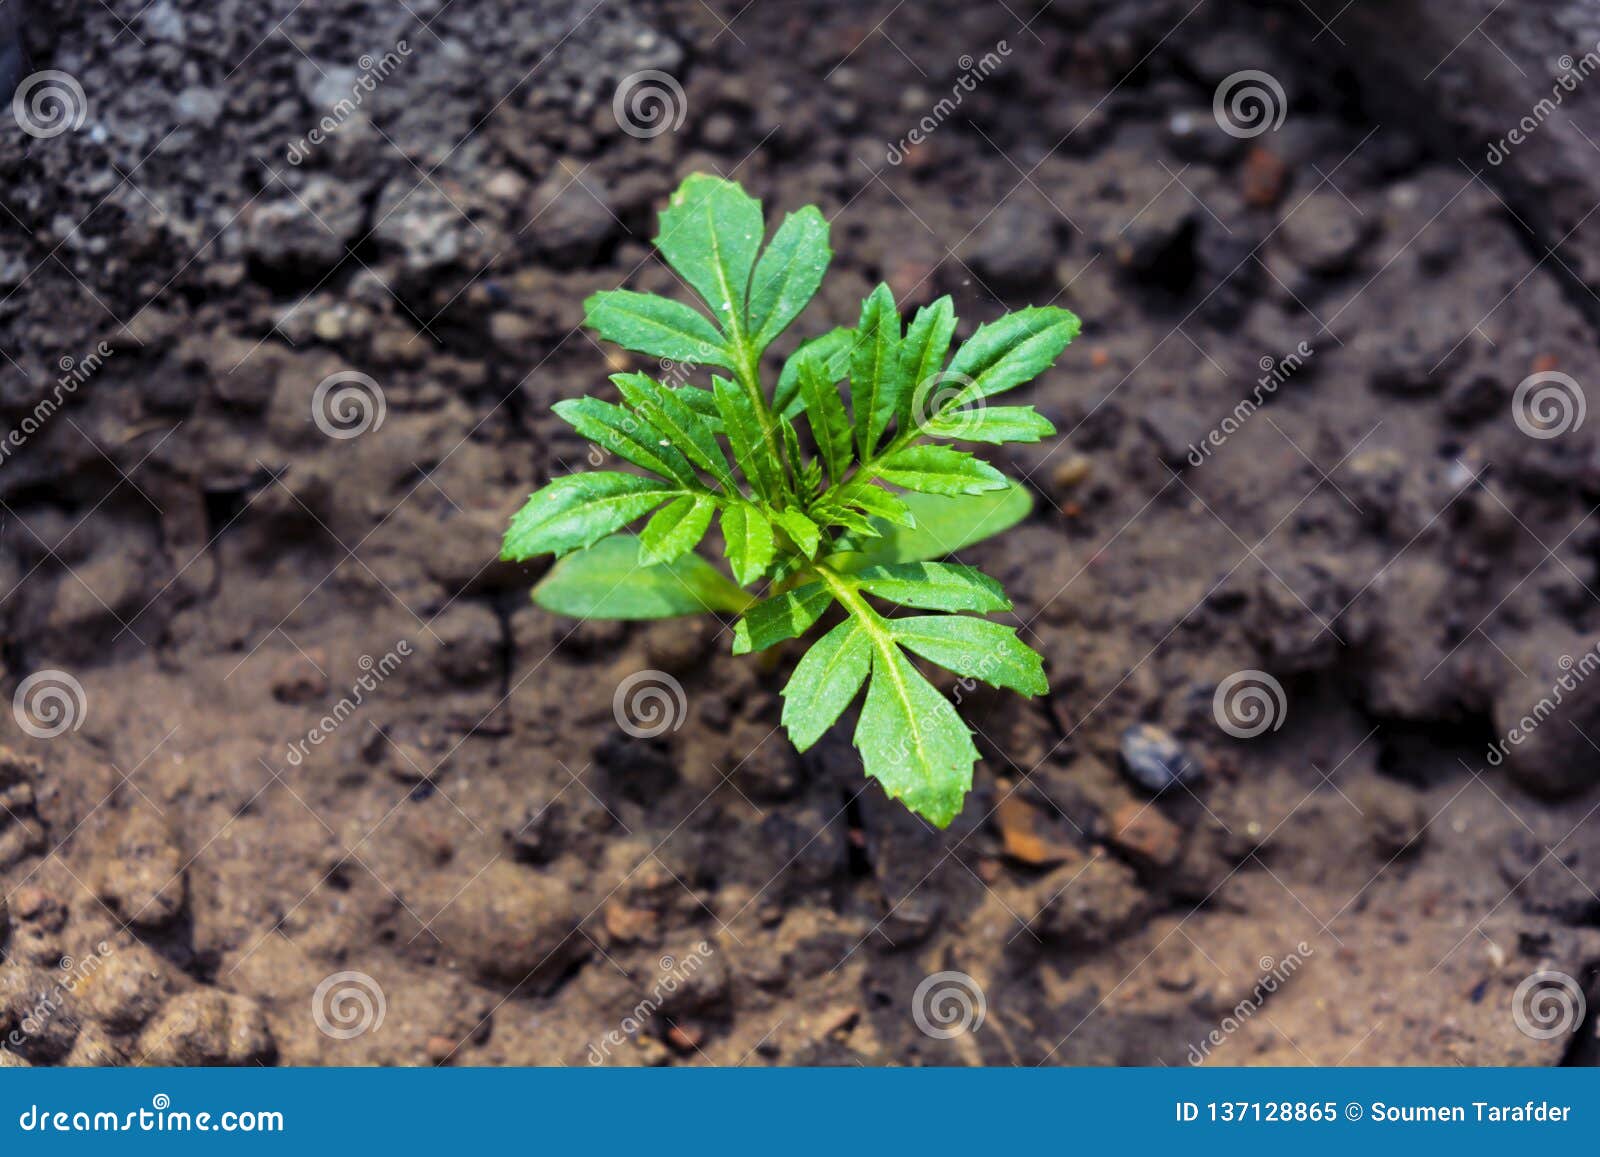 281 Young Seedling Marigold Plant Photos Free Royalty Free Stock Photos From Dreamstime